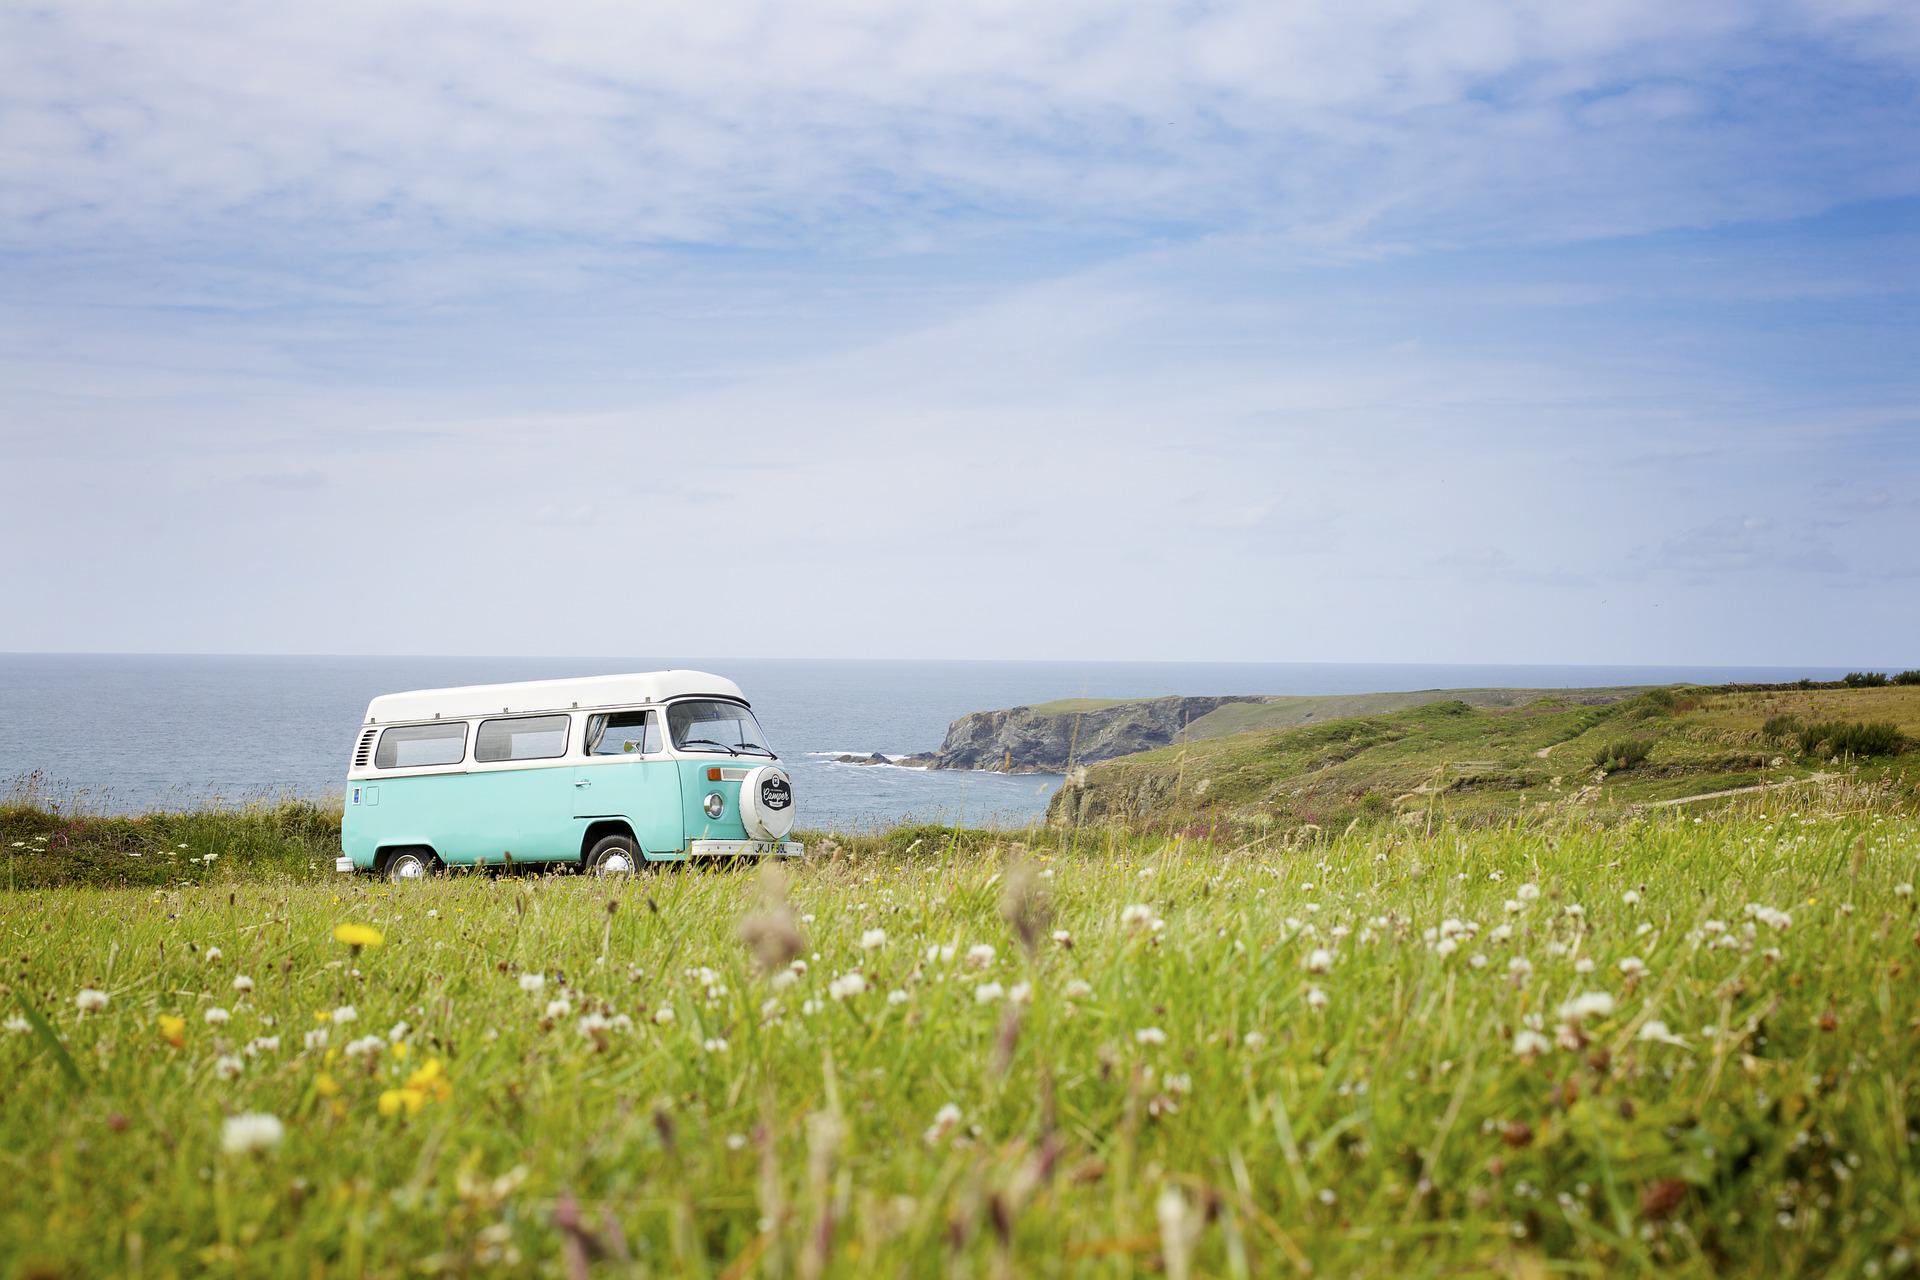 Campervan Hire In The UK, France, Spain & Italy | Rent A Campervan For Your Next Holiday